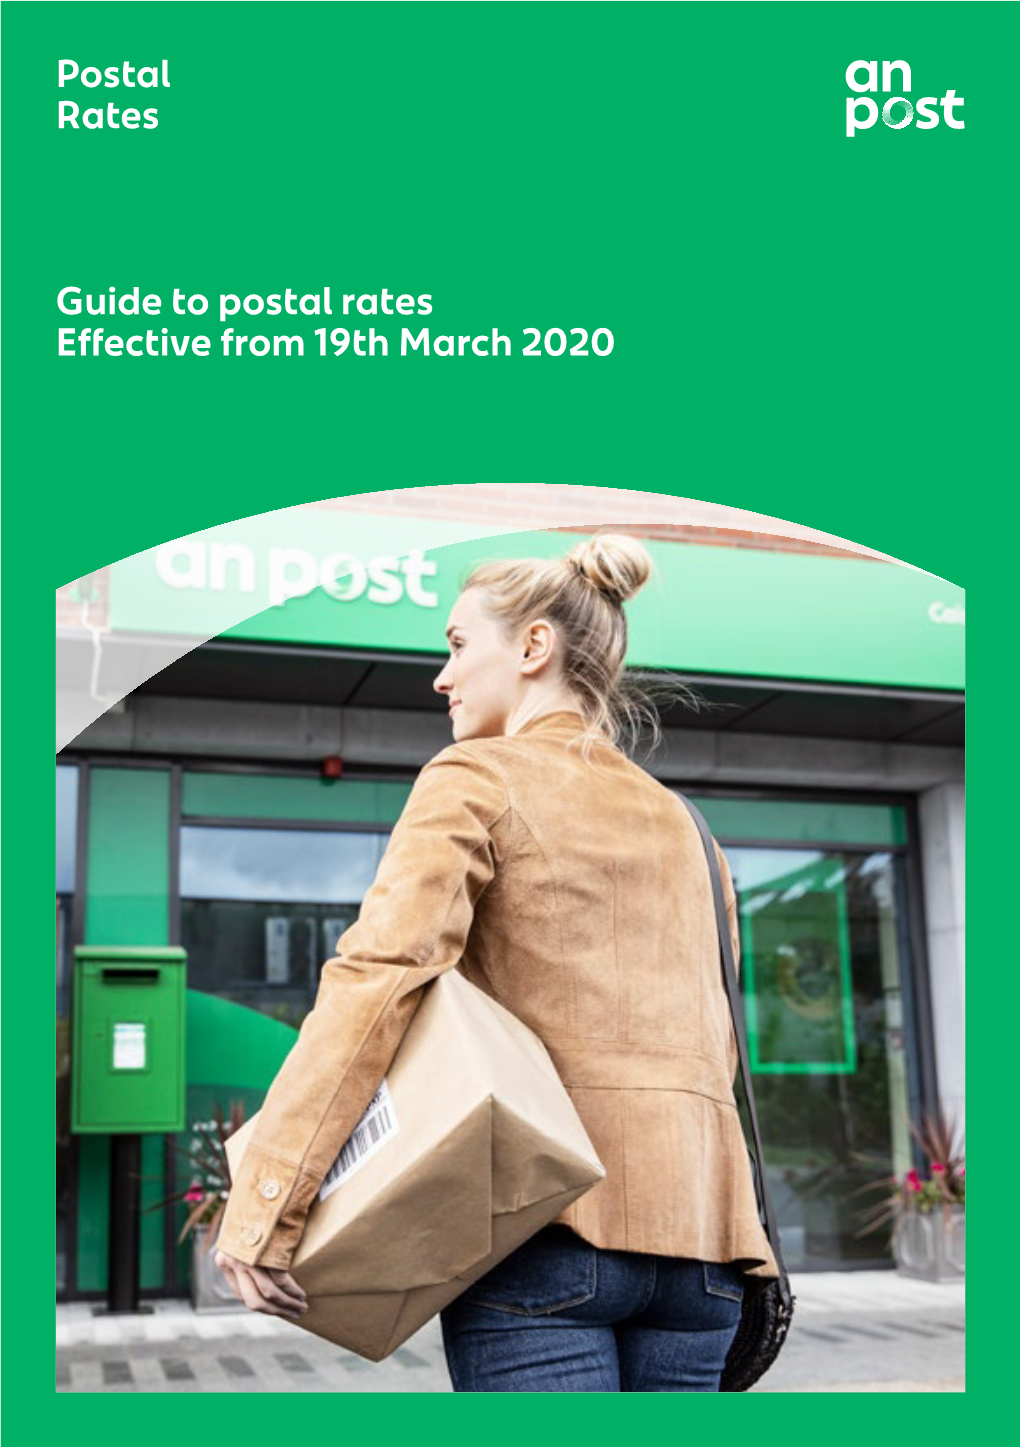 Download the Guide to Postal Rates